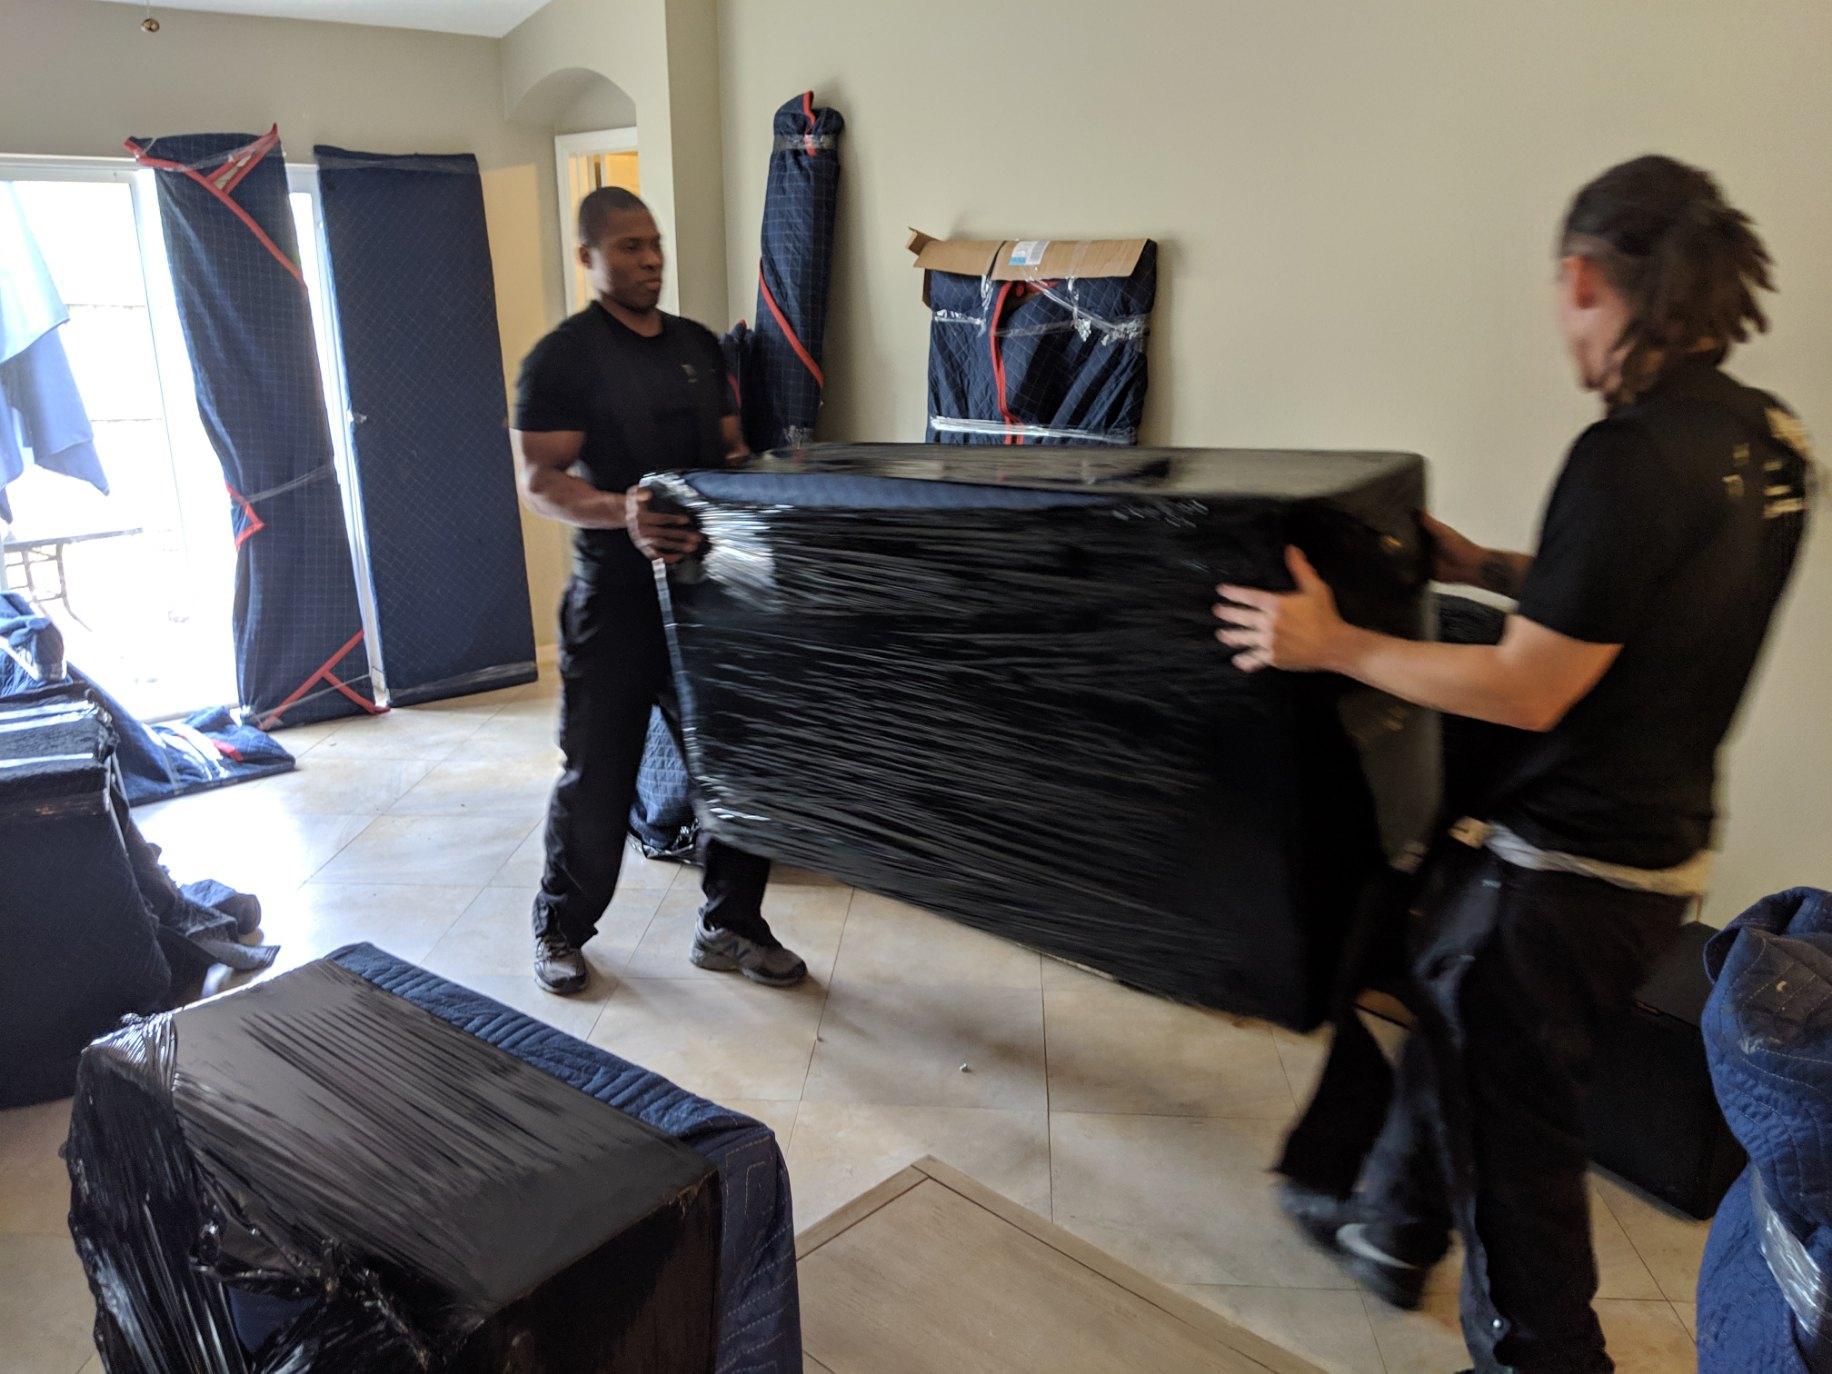 Affordable hot tub movers near me in Belleair, FL